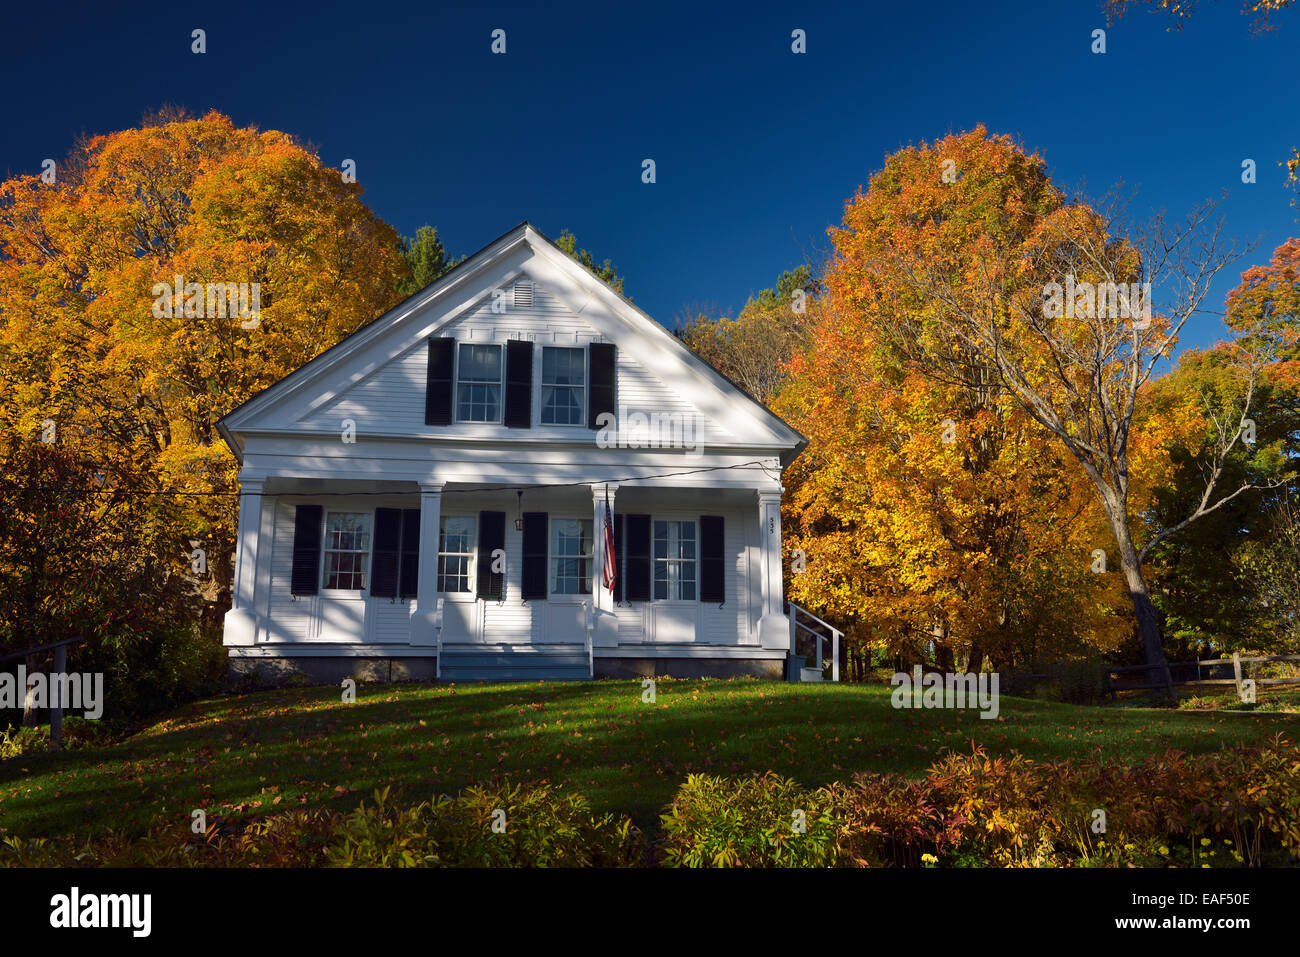 Historic Village home in Peacham Vermont with trees in Fall colors or orange Stock Photo